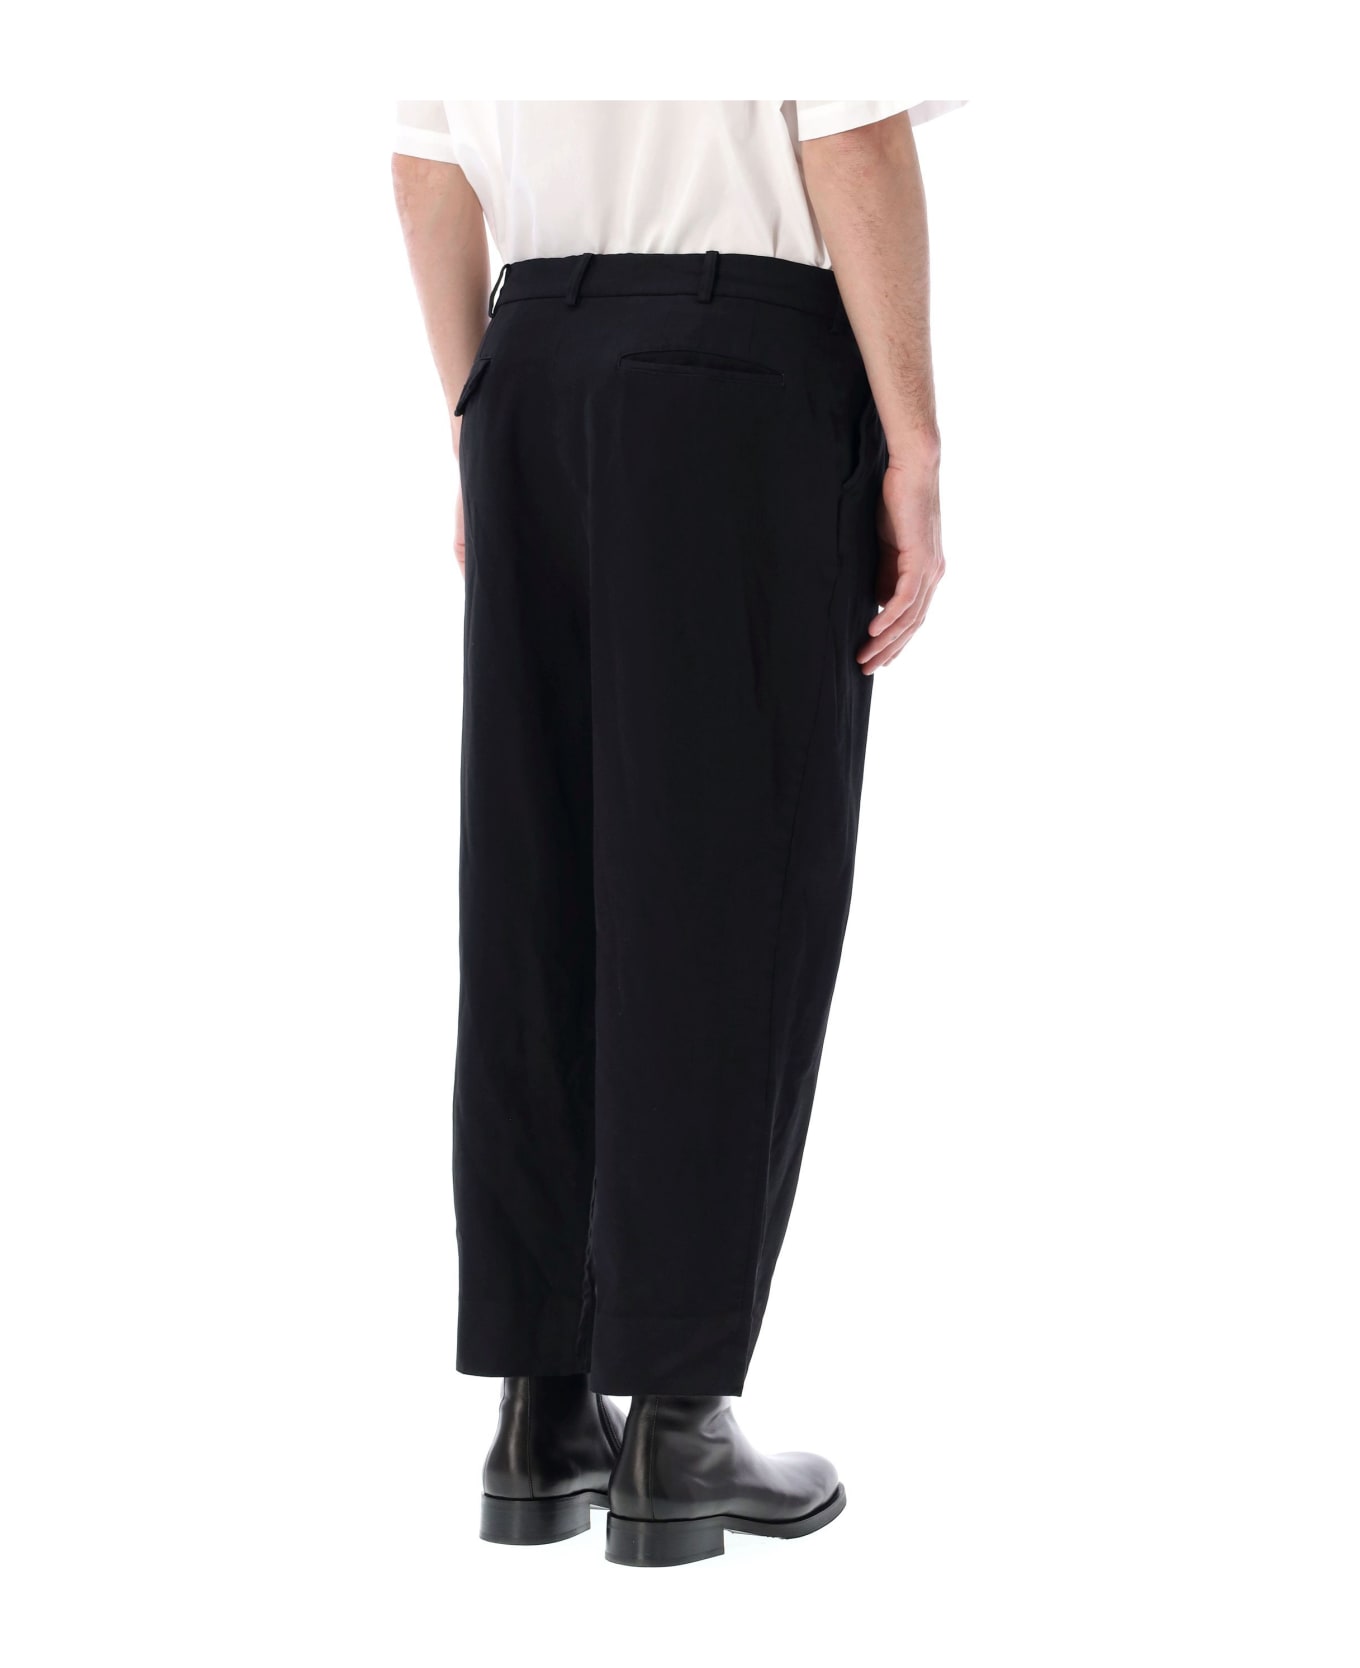 Comme des Garçons Homme Pleated Chino Pants - BLACK ボトムス